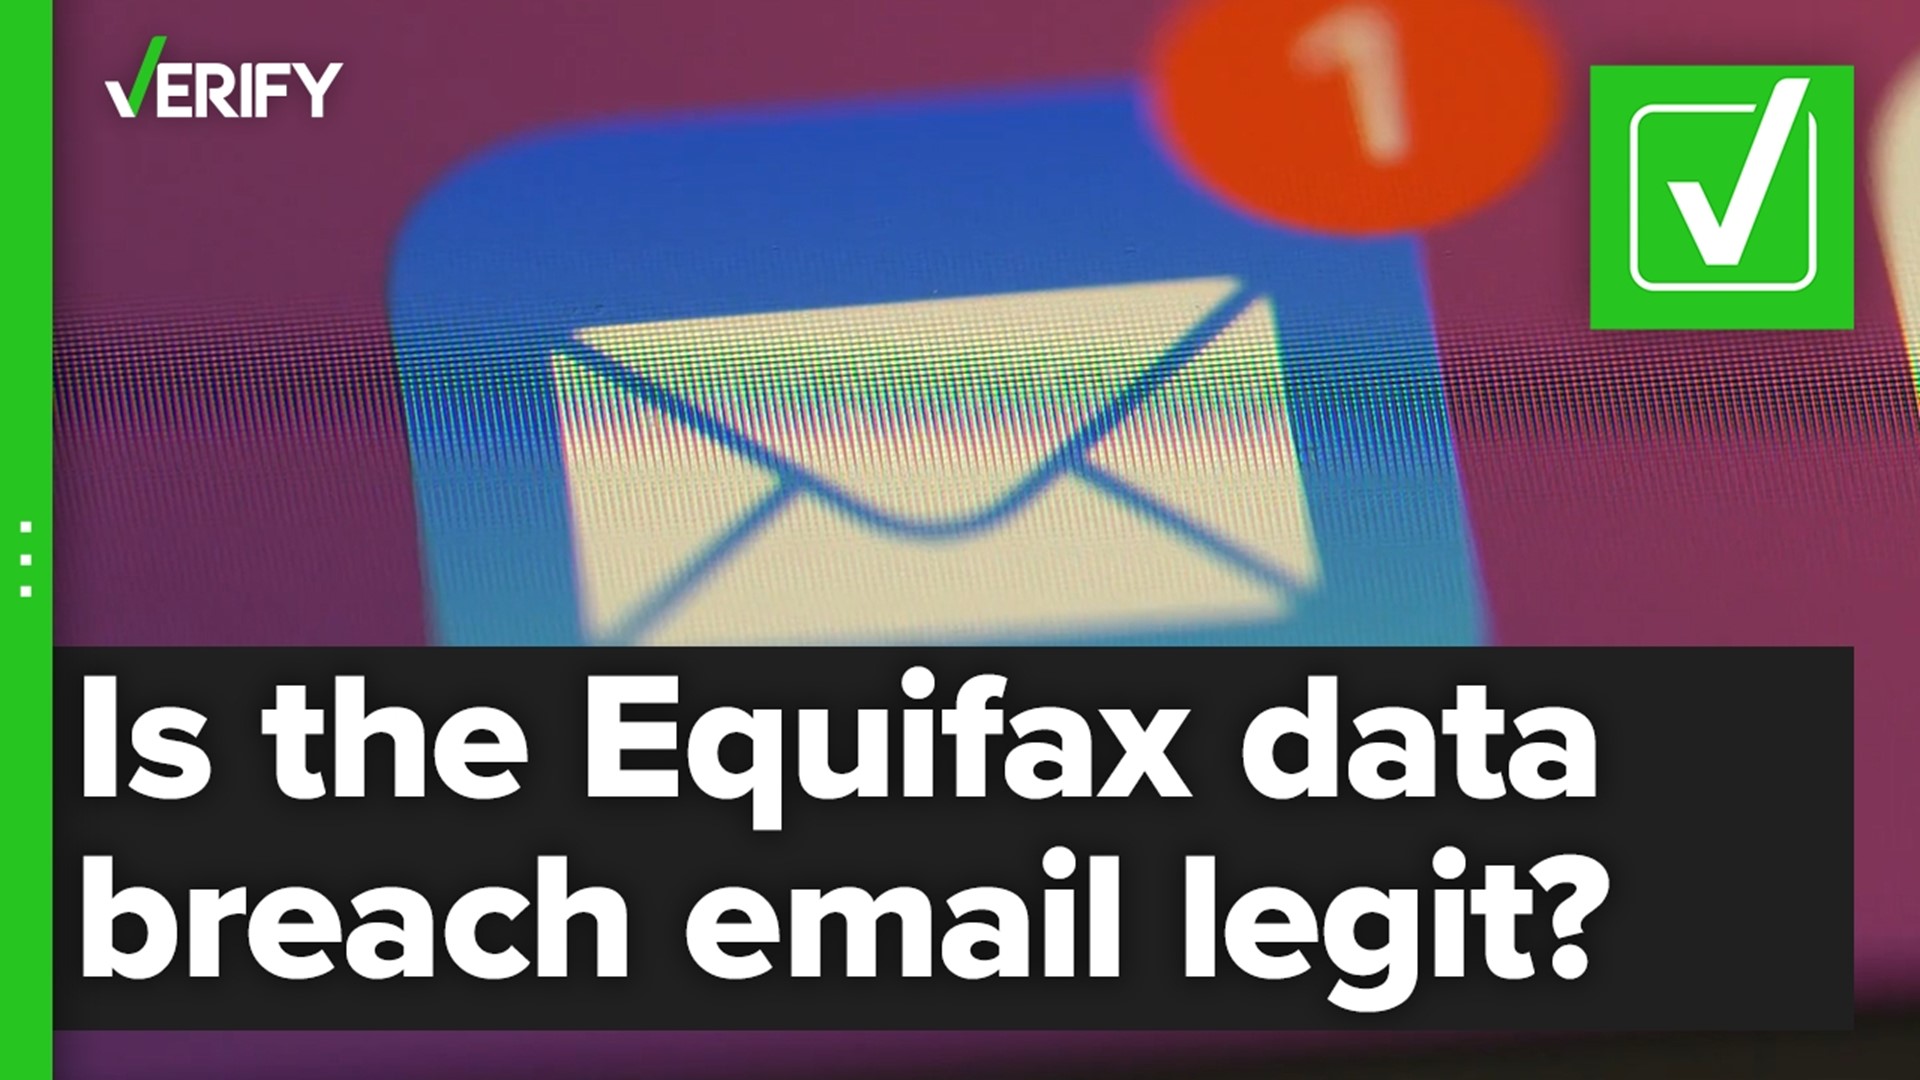 Is this email offering credit monitoring for Equifax cyberattack victims legit?  The VERIFY team confirms this is true.